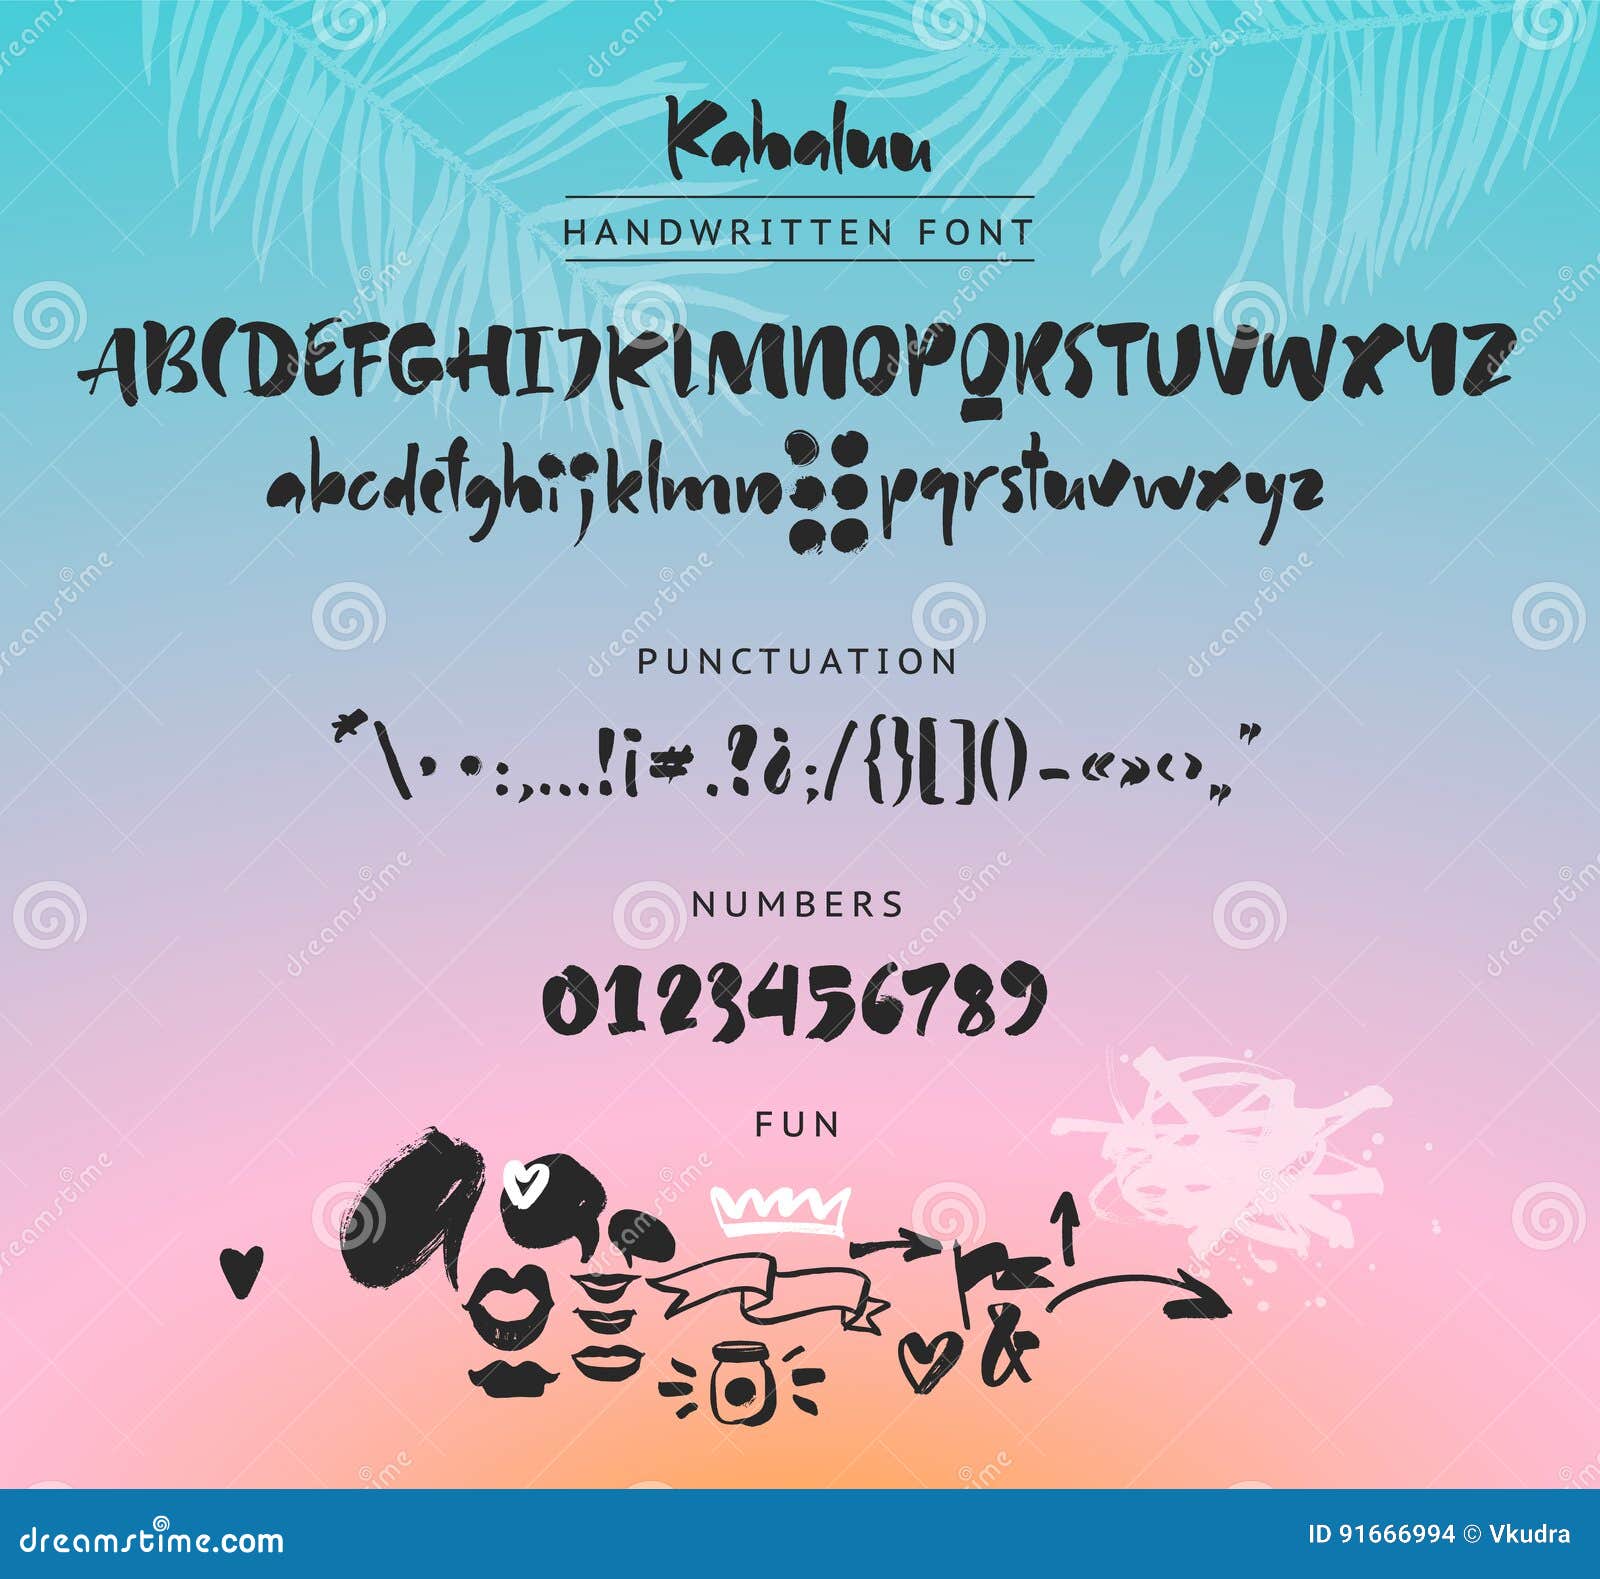 kahaluu handwritten script font. brush font. uppercase, lowercase, numbers, punctuation and a lot of fun figures